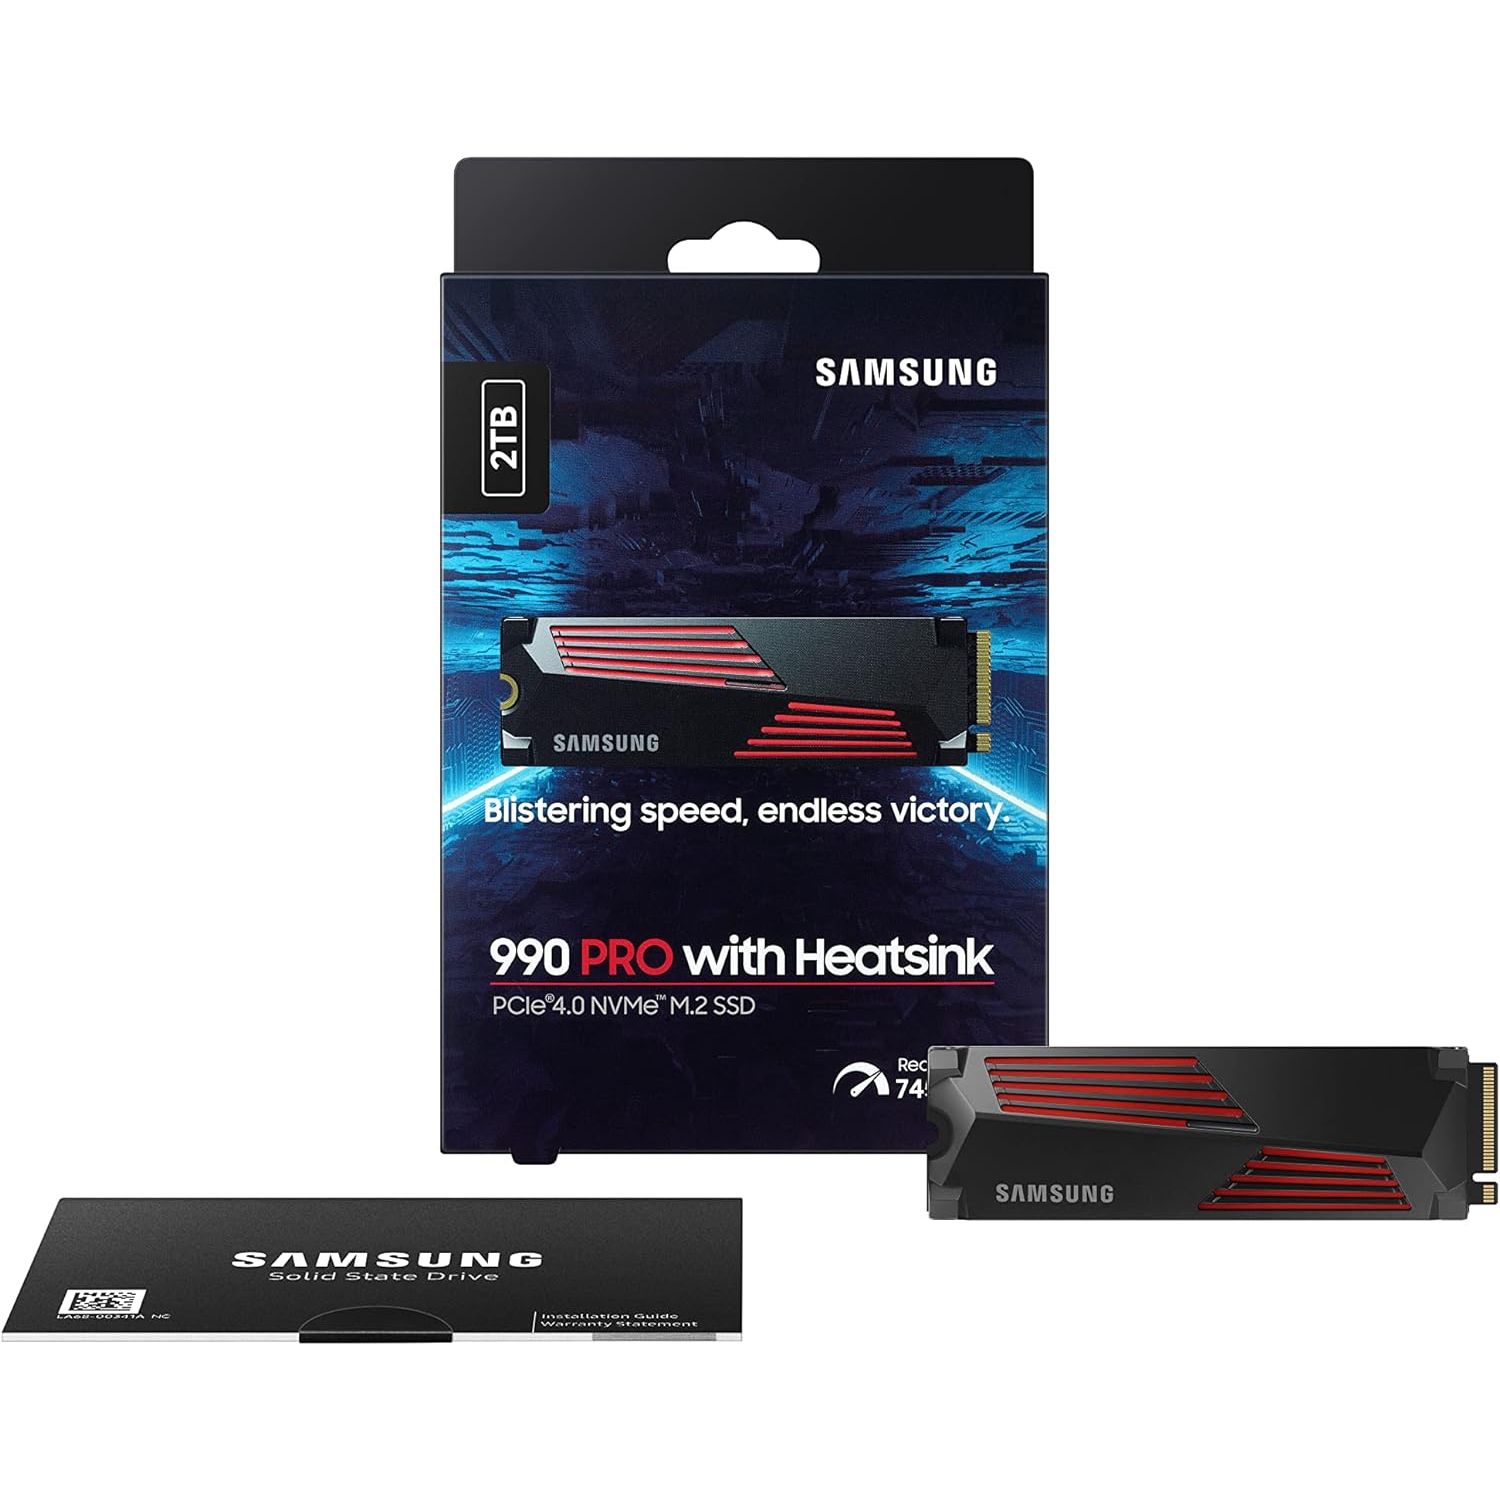 Samsung 990 PRO Heatsink NVMe M.2 SSD with Heat Sink, 2 TB, PCIe 4.0, 7,450 MB/s Read, 6,900 MB/s Write, Internal SSD with RGB for PC/Console Gaming and Video Editing, MZ-V9P2T0CW